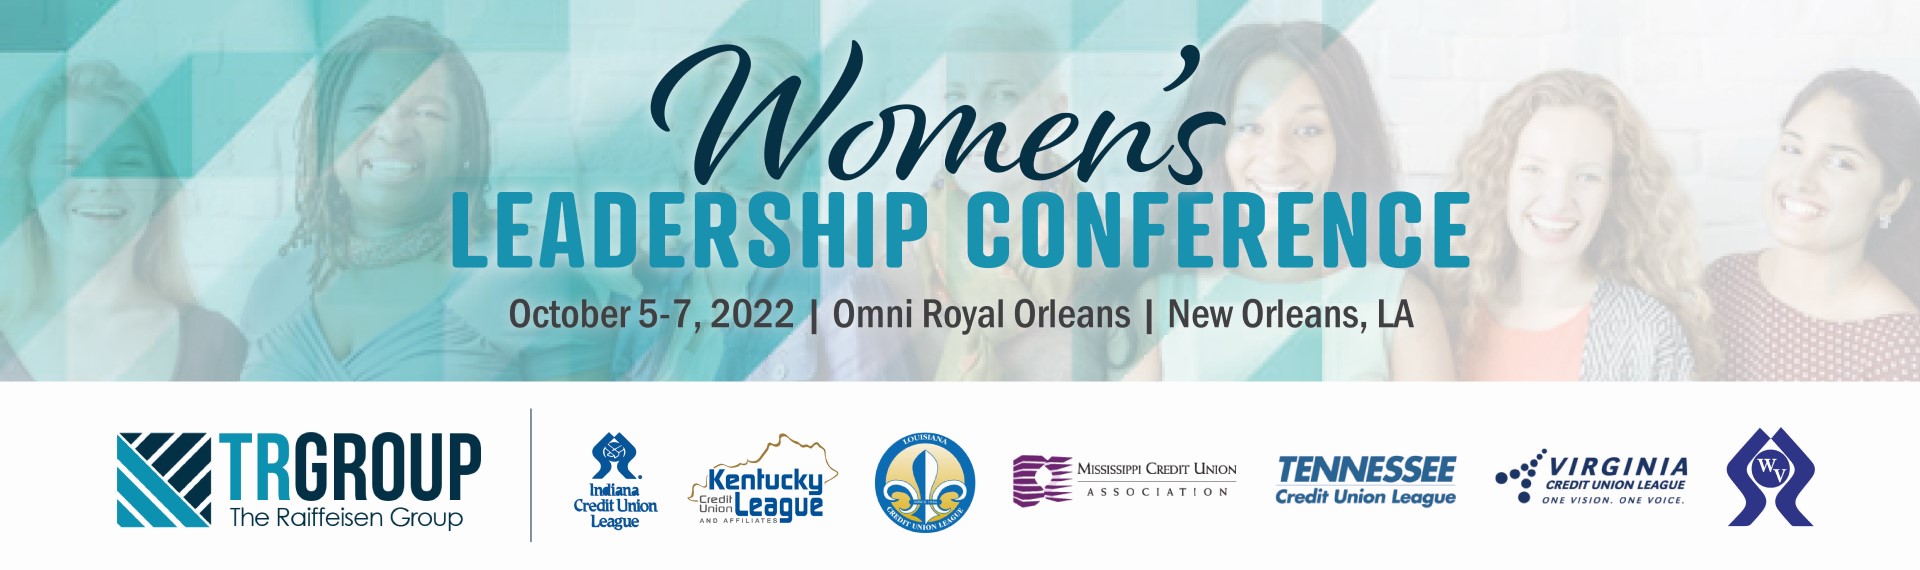 Women’s Leadership Conference